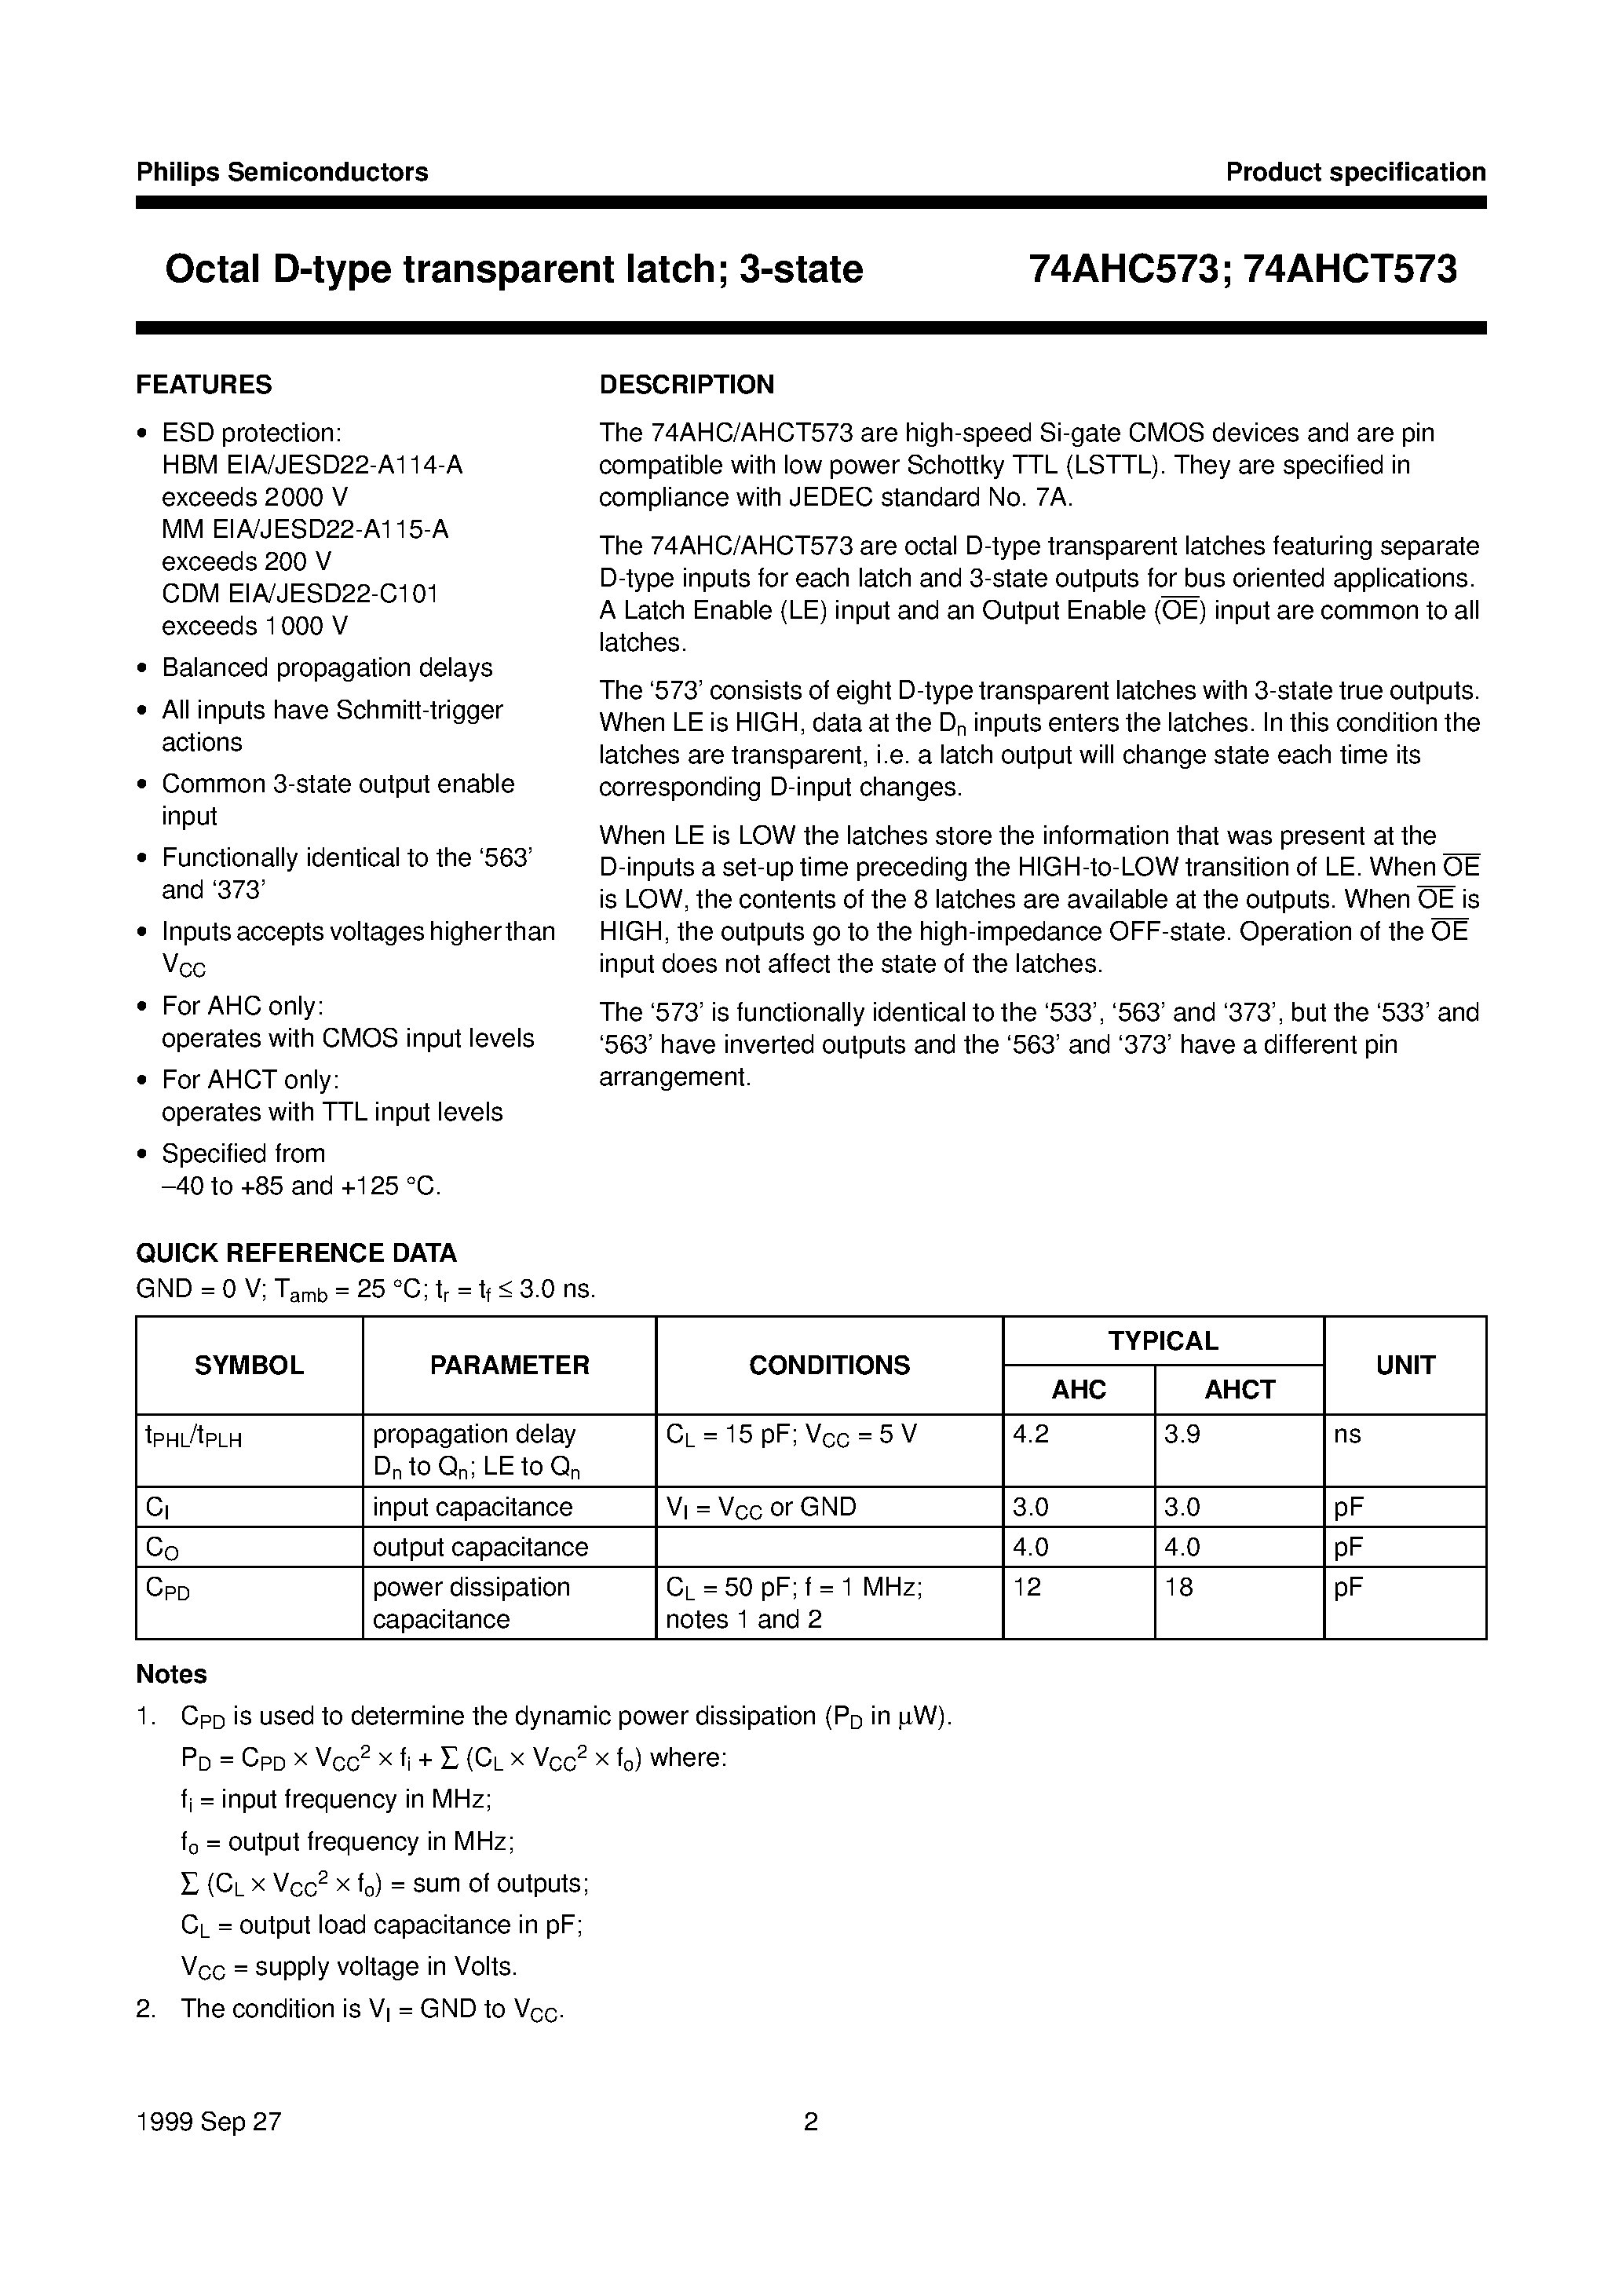 Datasheet 74AHCT573D - Octal D-type transparent latch; 3-state page 2